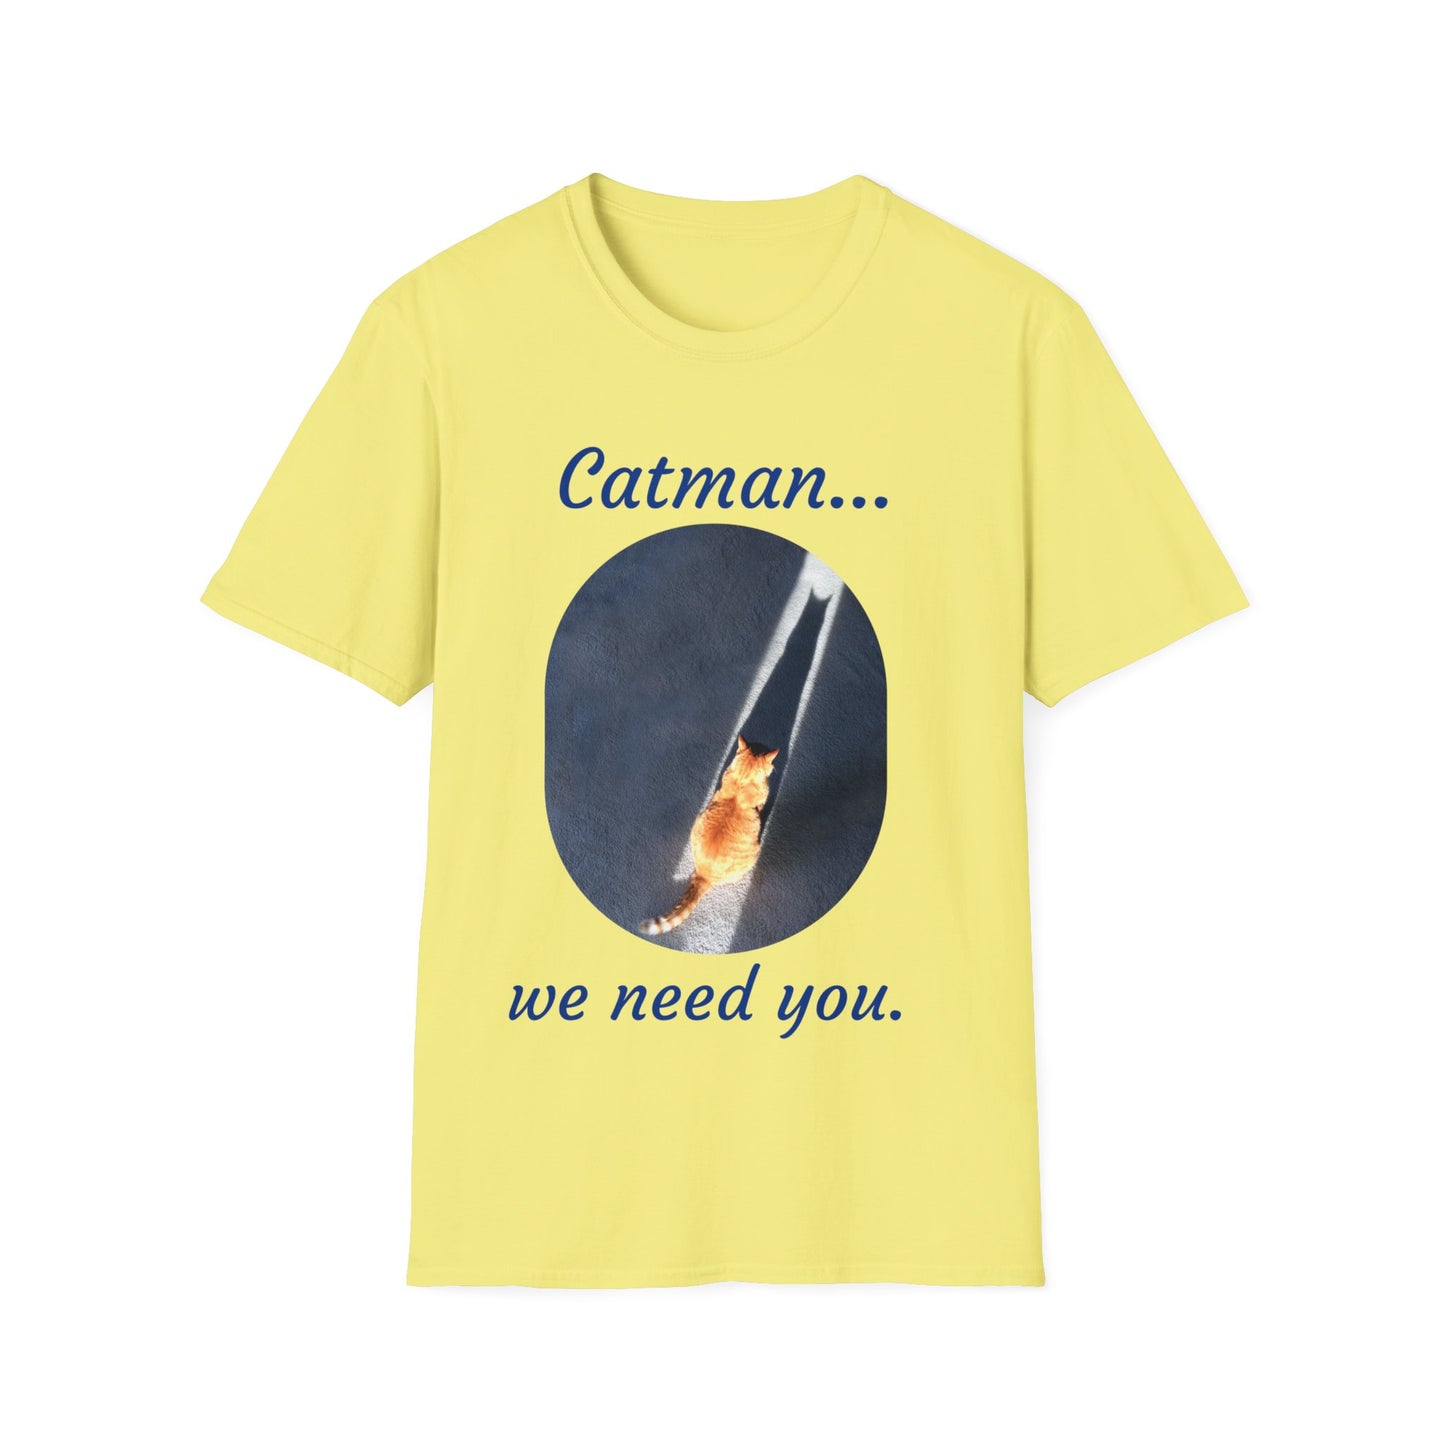 Catman Shadow Shirt-Funny Cat T Shirt - Cat Silhouette Shadow - Adorable Tabby Gift - Cat Lovers Gift